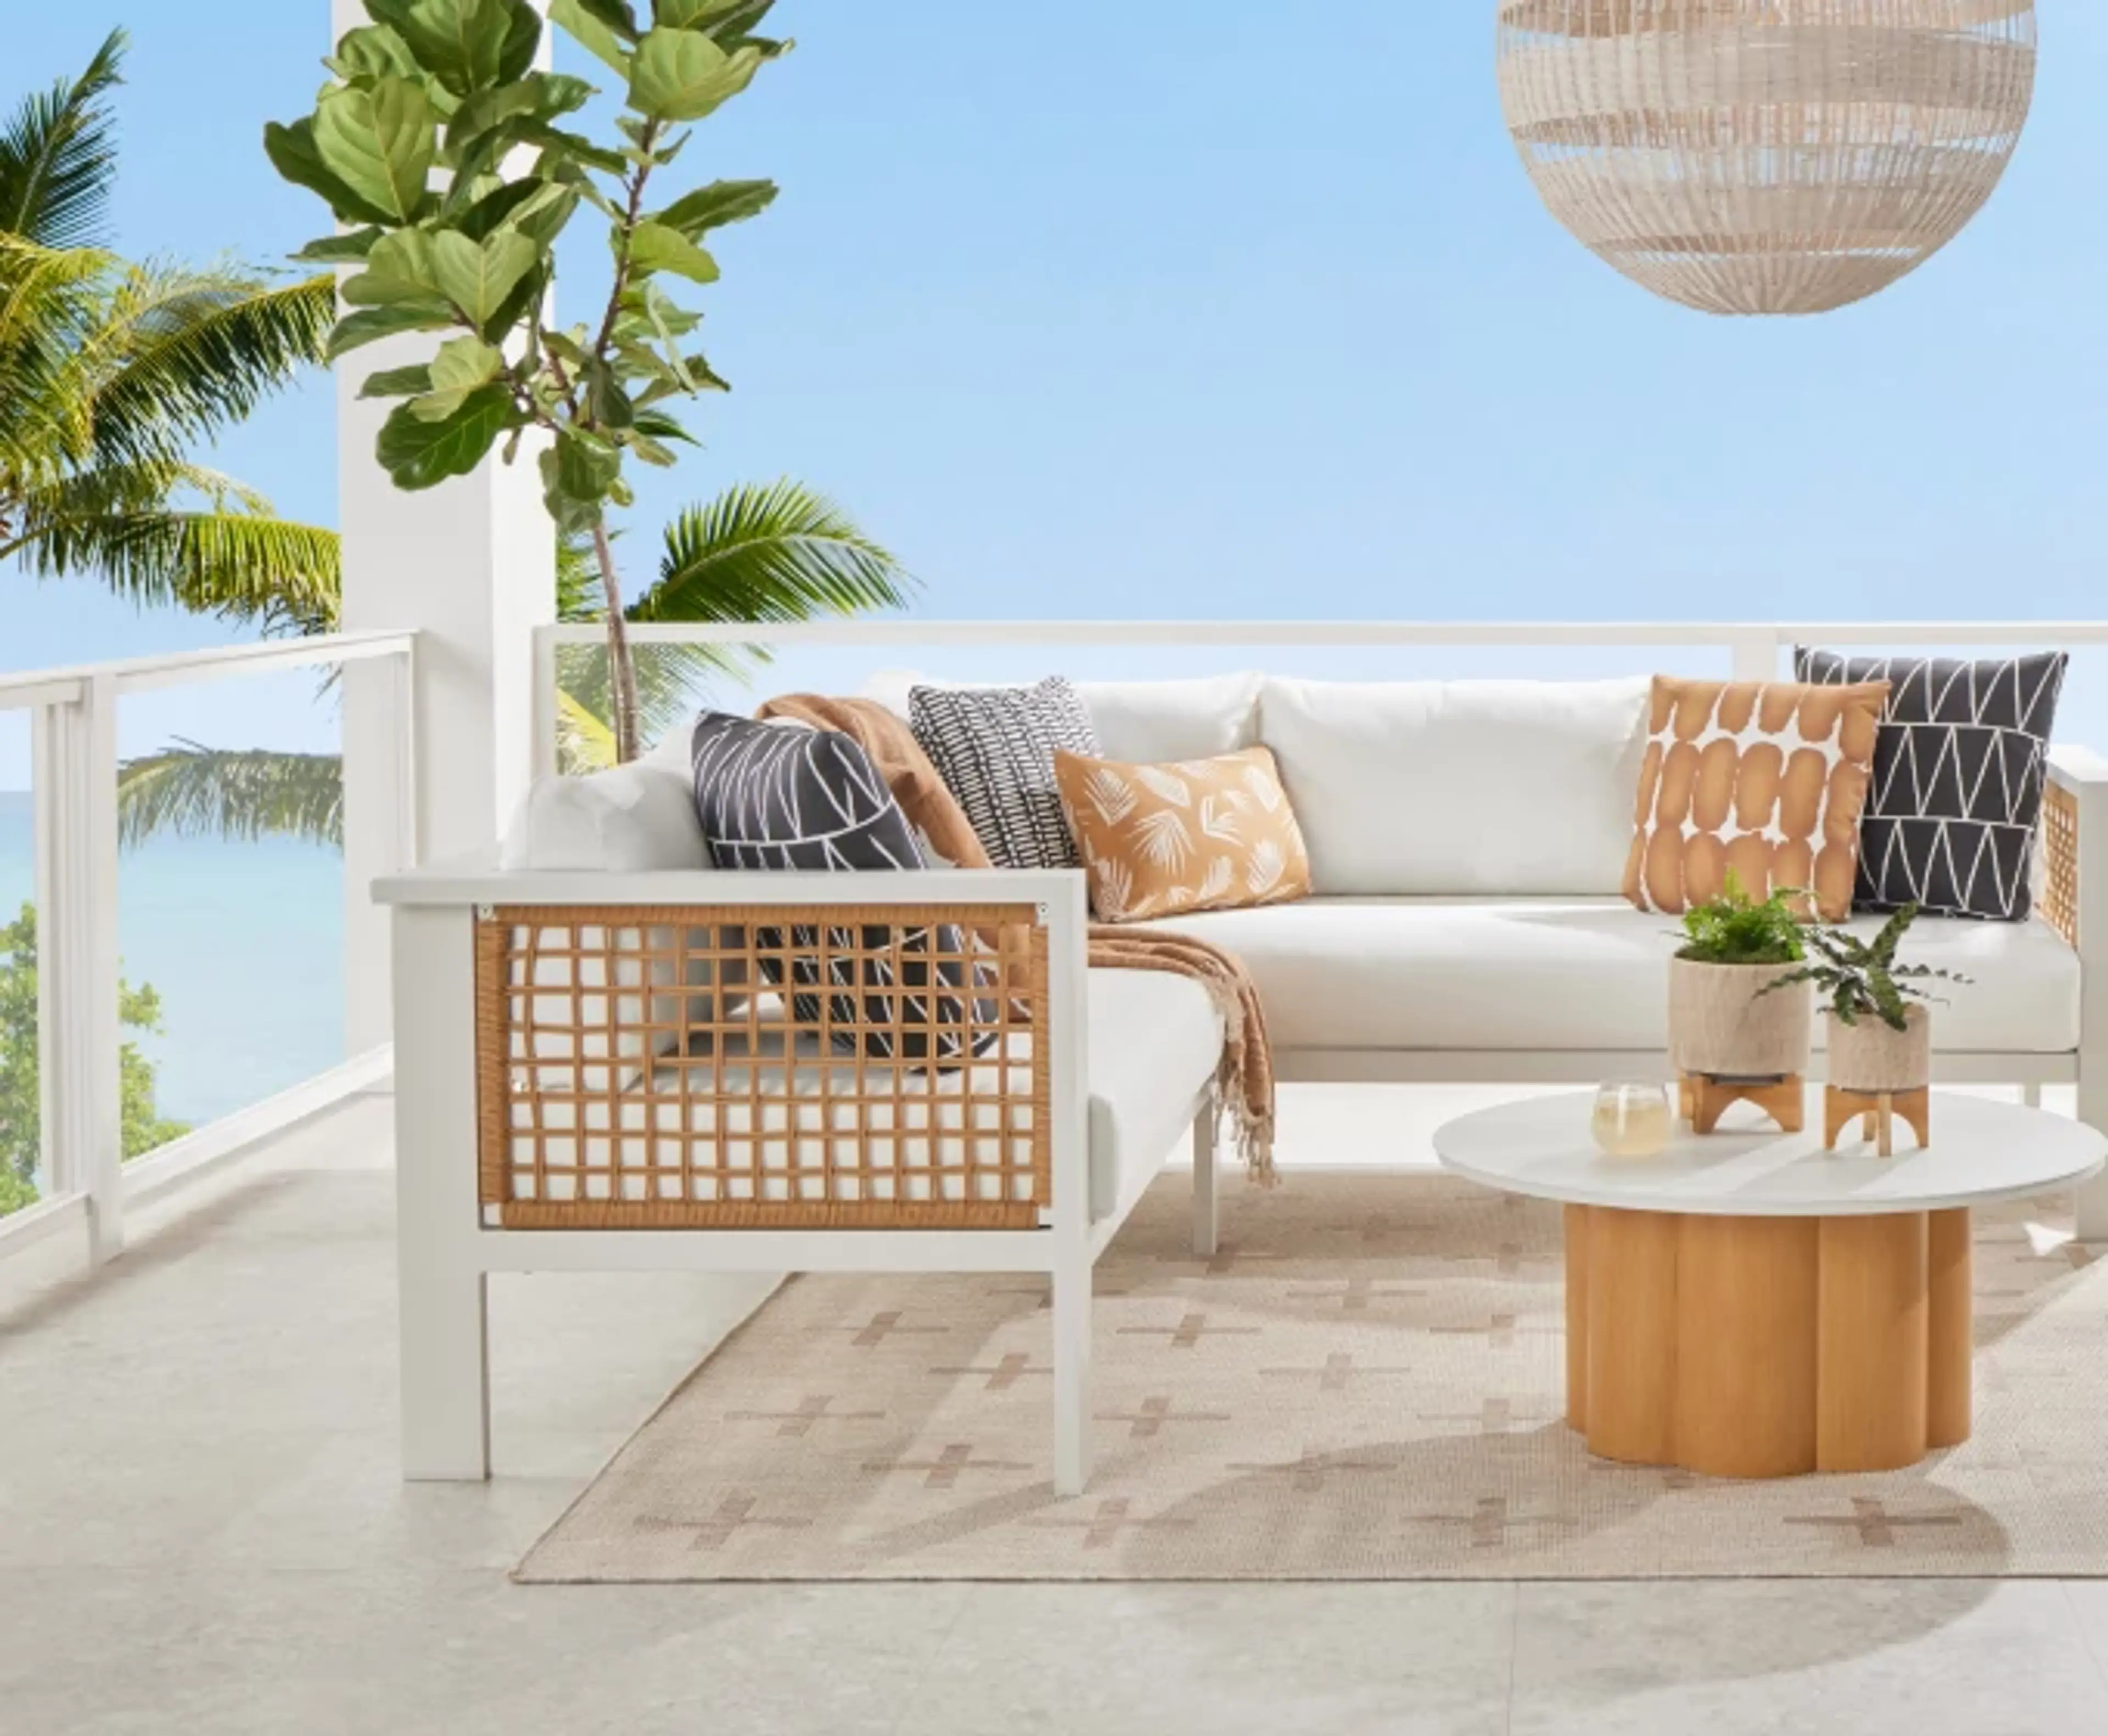 Transform Your Outdoor Space with the Modern Sunrise Collection